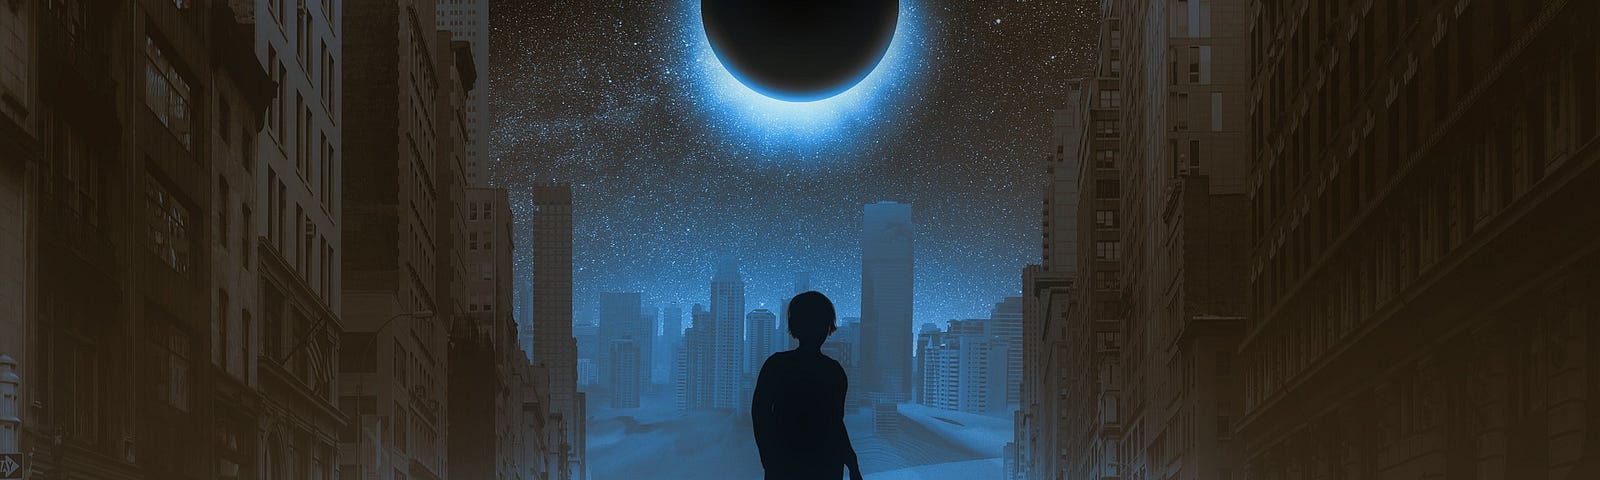 A night city street with a lunar eclipse centred in the sky above. A person is silhouetted walking away from the viewer.